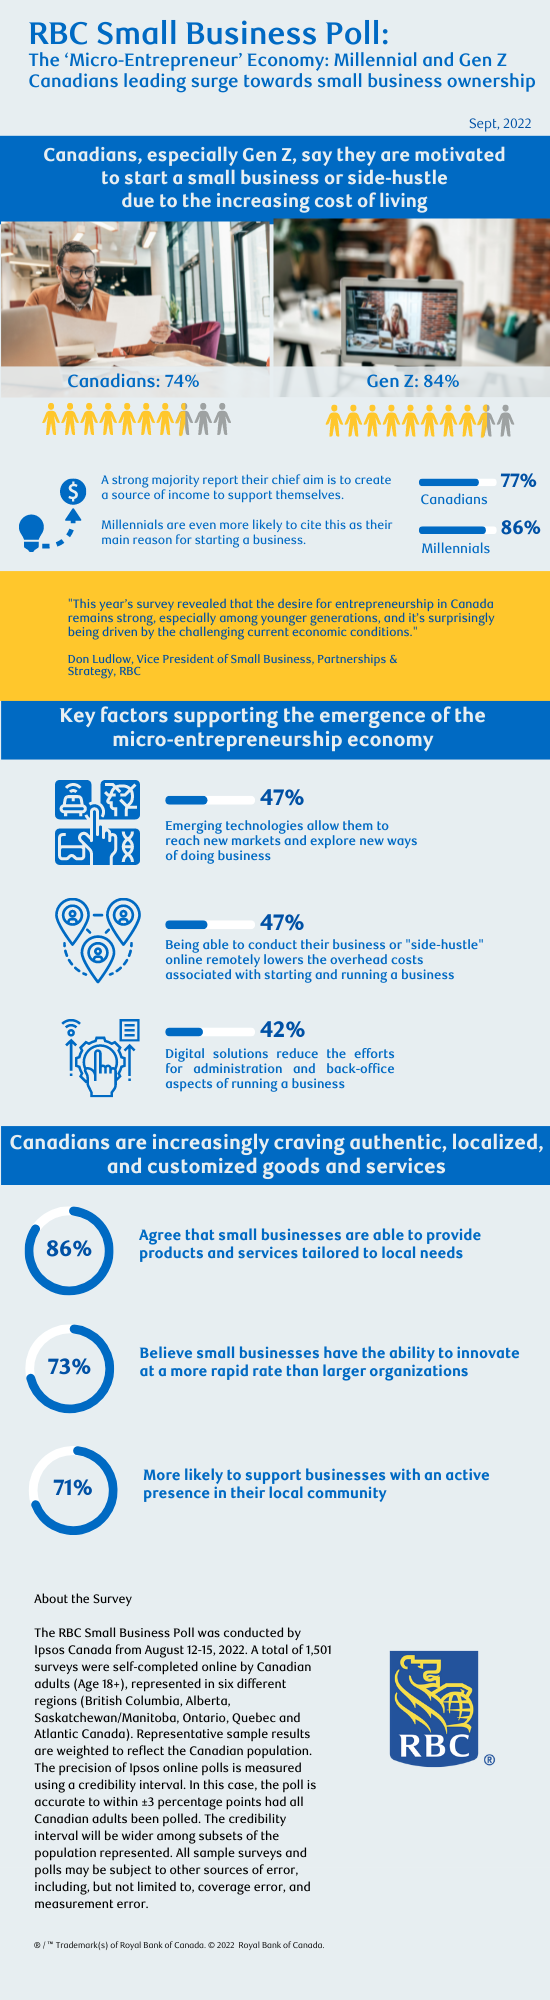 RBC Small Business Poll Infographic